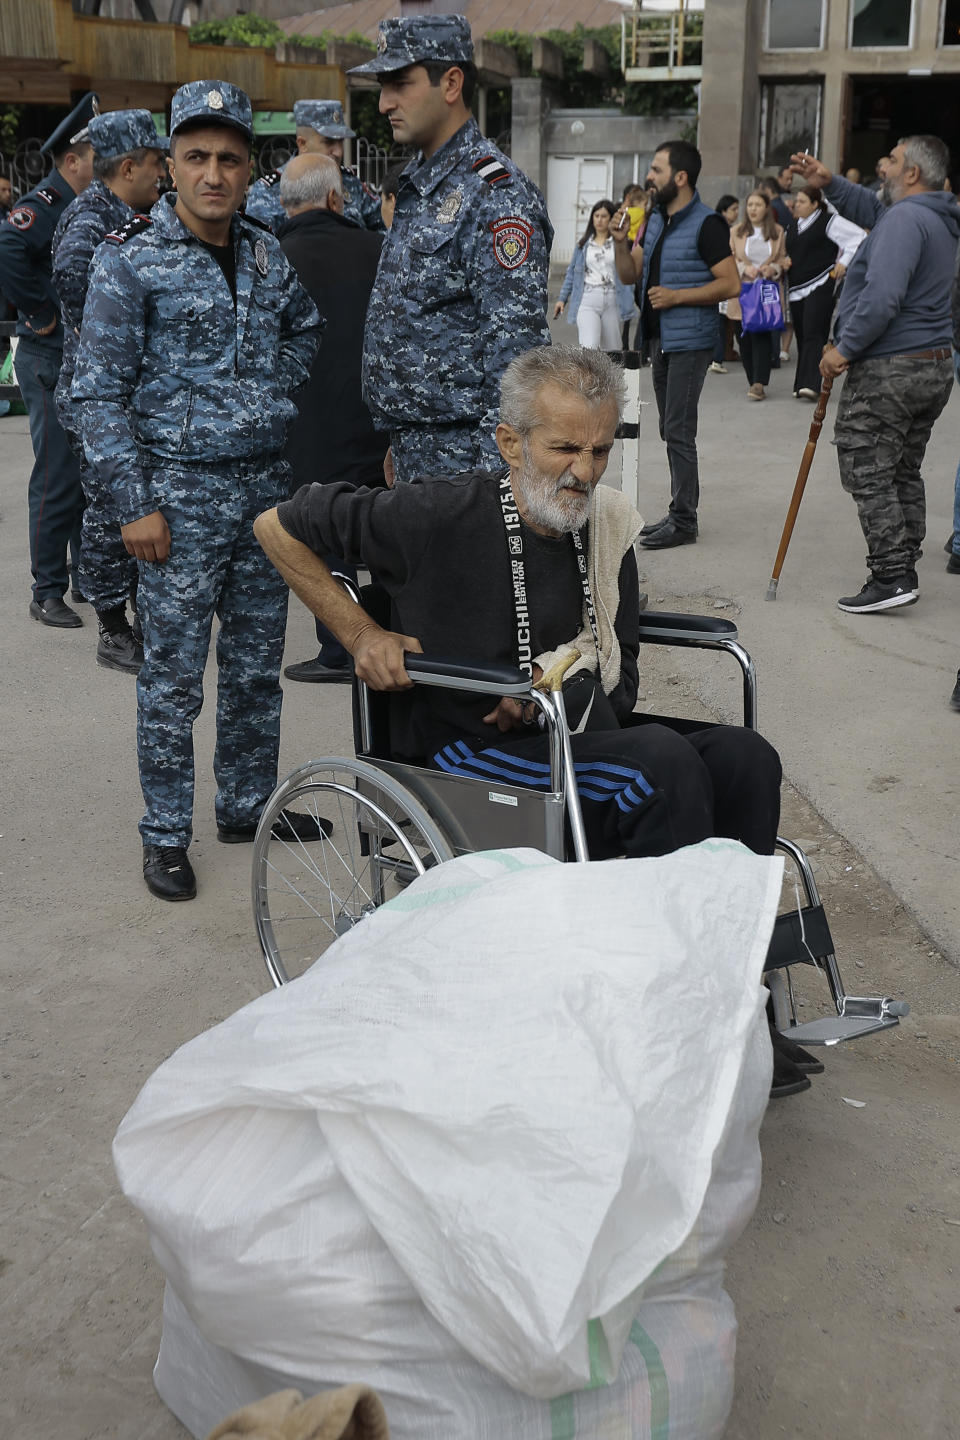 An ethnic Armenian from Nagorno-Karabakh sits in a wheelchair upon arrival in Armenia's Goris, the town in Syunik region, Armenia, Monday, Sept. 25, 2023. Thousands of Armenians have streamed out of Nagorno-Karabakh after the Azerbaijani military reclaimed full control of the breakaway region last week. (AP Photo/Vasily Krestyaninov)